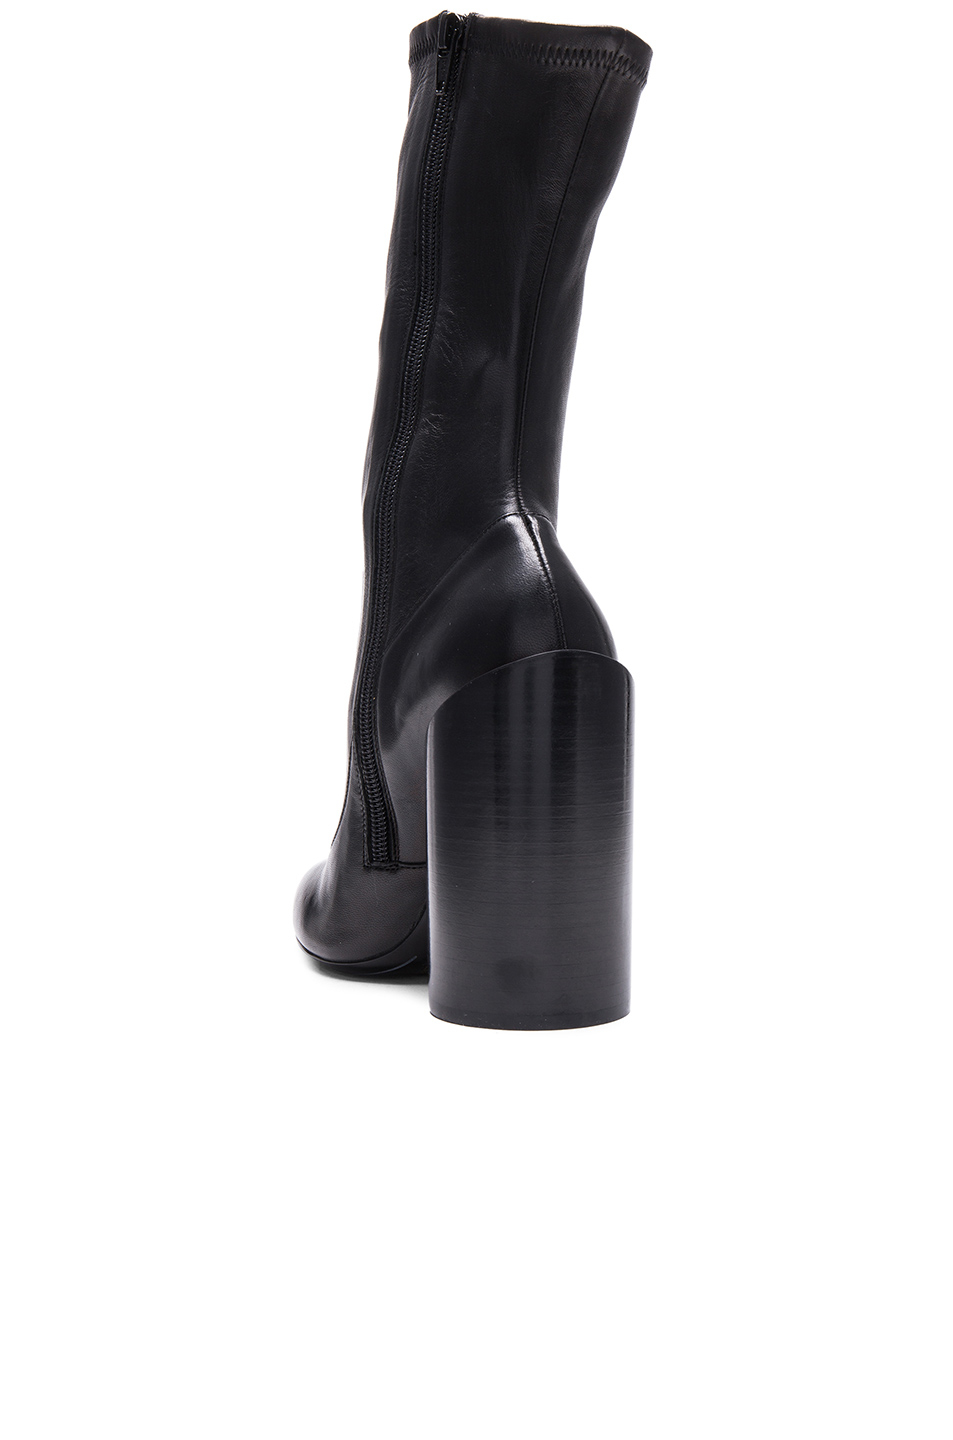 Givenchy Stretch Leather Runway Boots in Black | Lyst